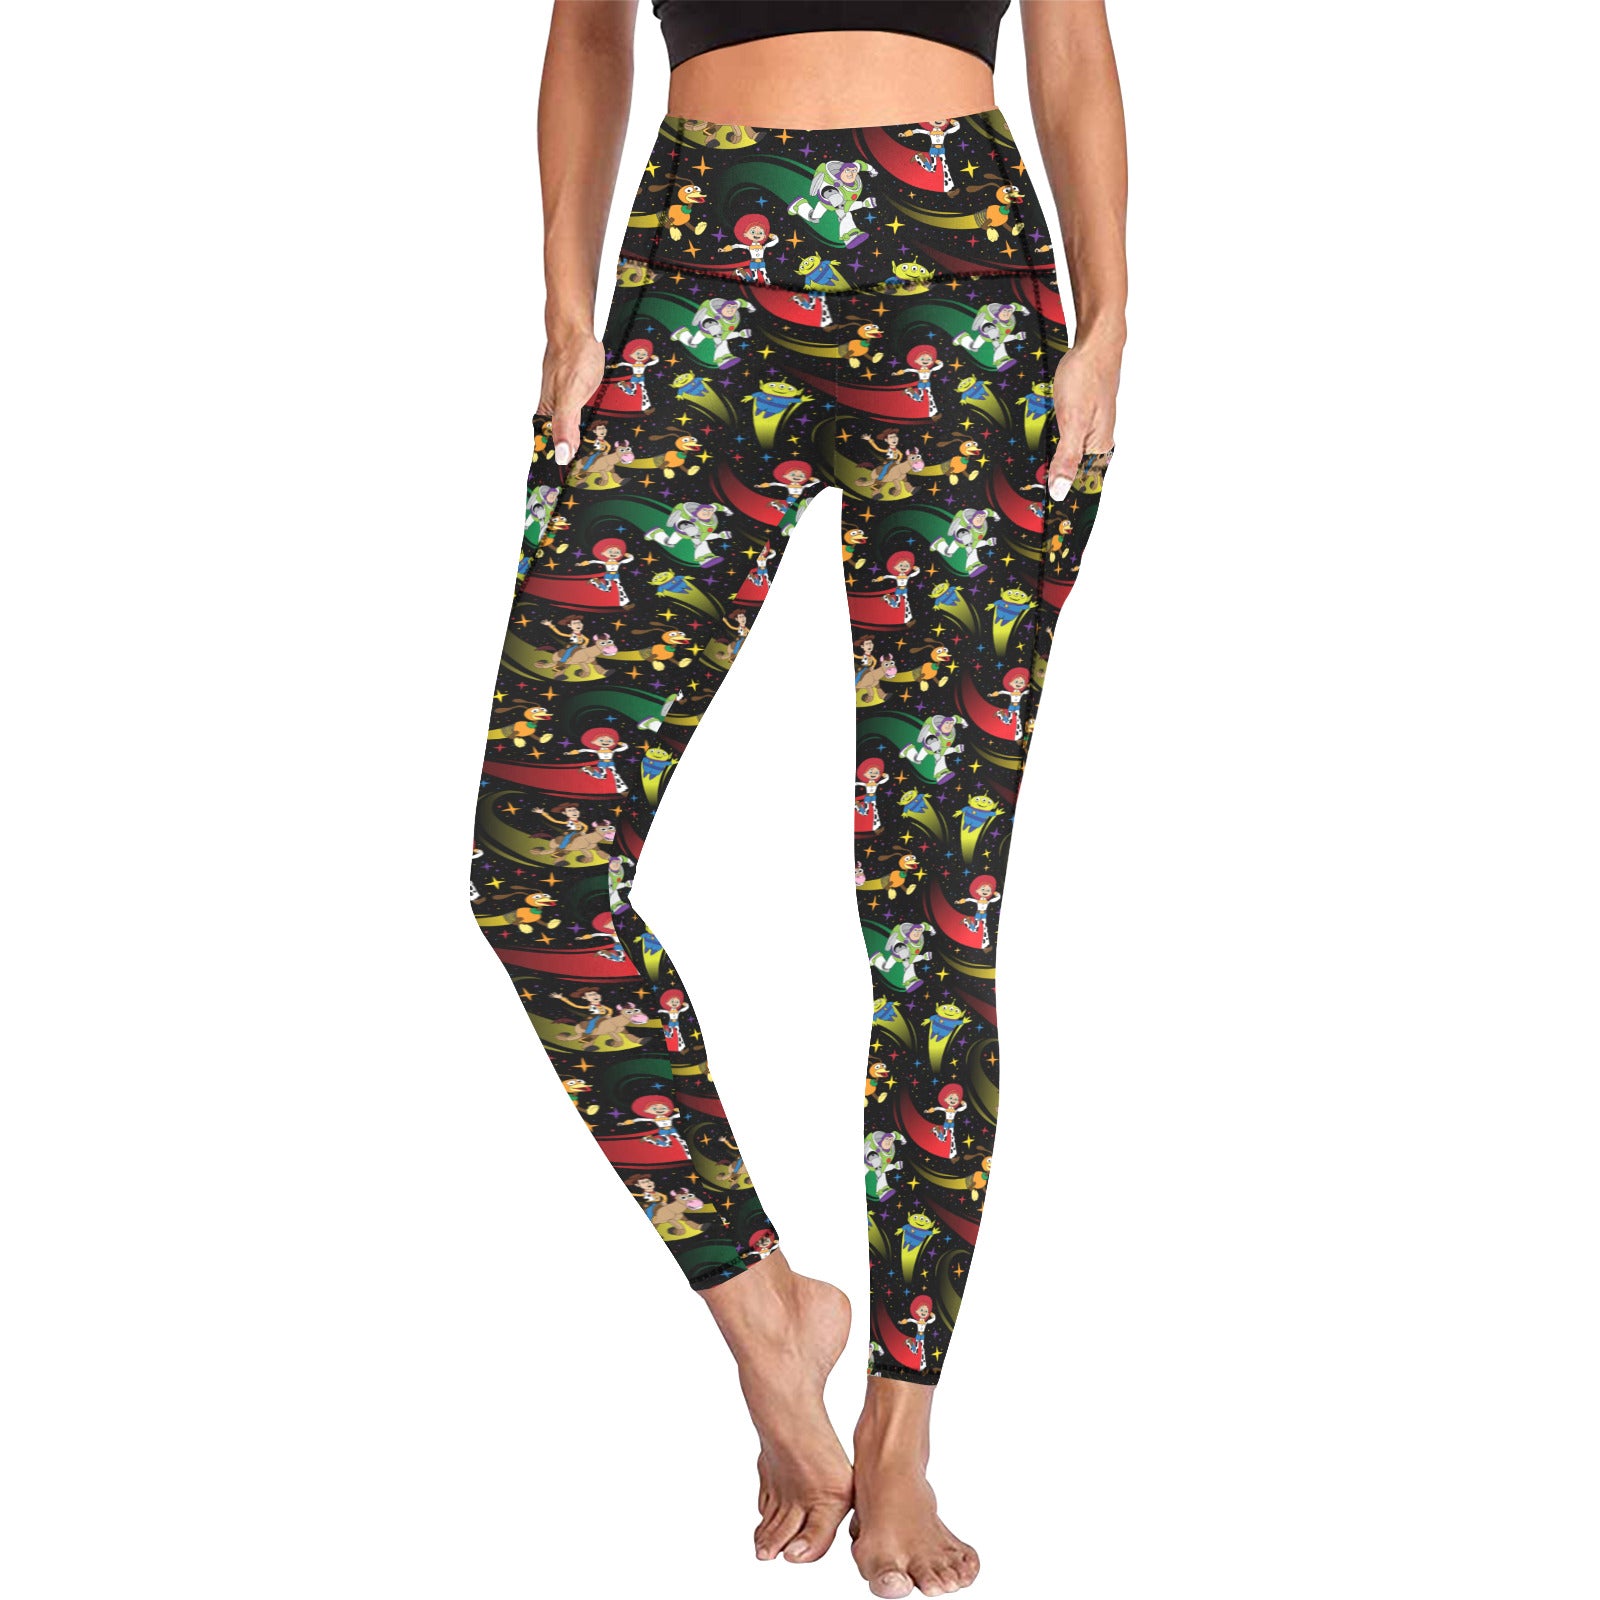 Roundup Women's Athletic Leggings With Pockets